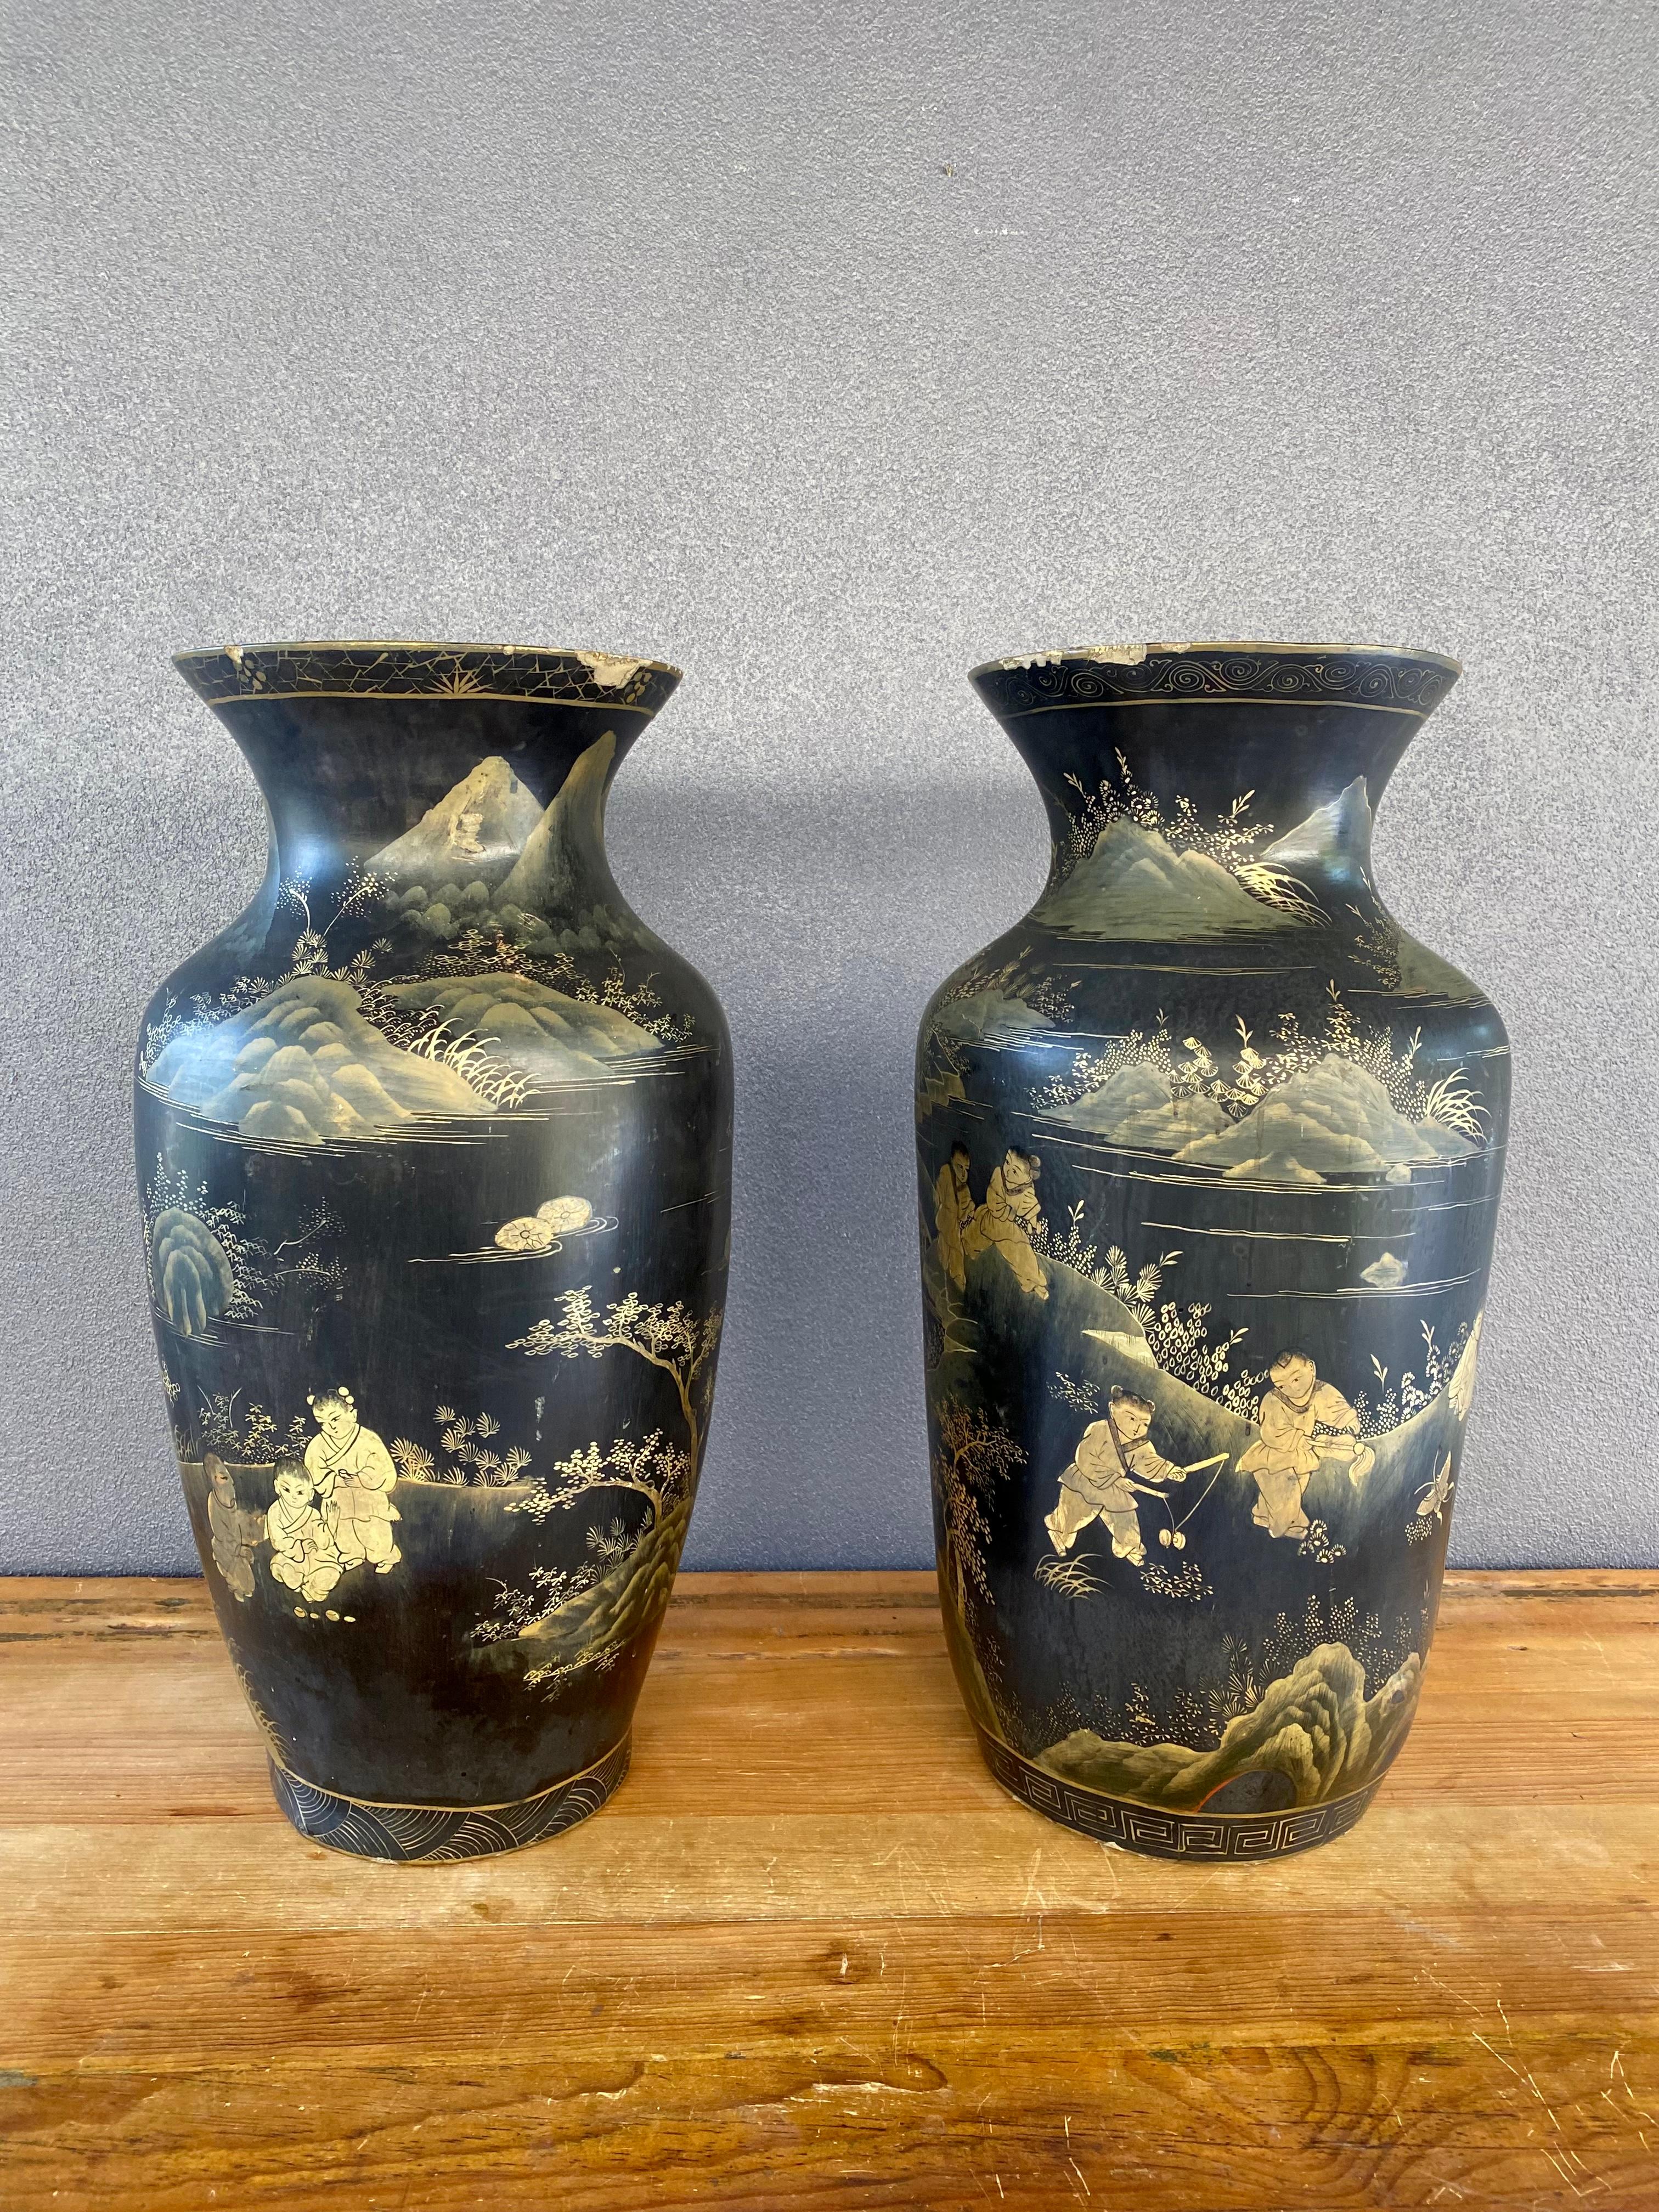 On offer on this occasion is one of the most stunning and hand painted wood vases you could hope to find. Outstanding design is exhibited throughout. The beautiful set is statement piece and packed with personality!  Just look at the gorgeous hand